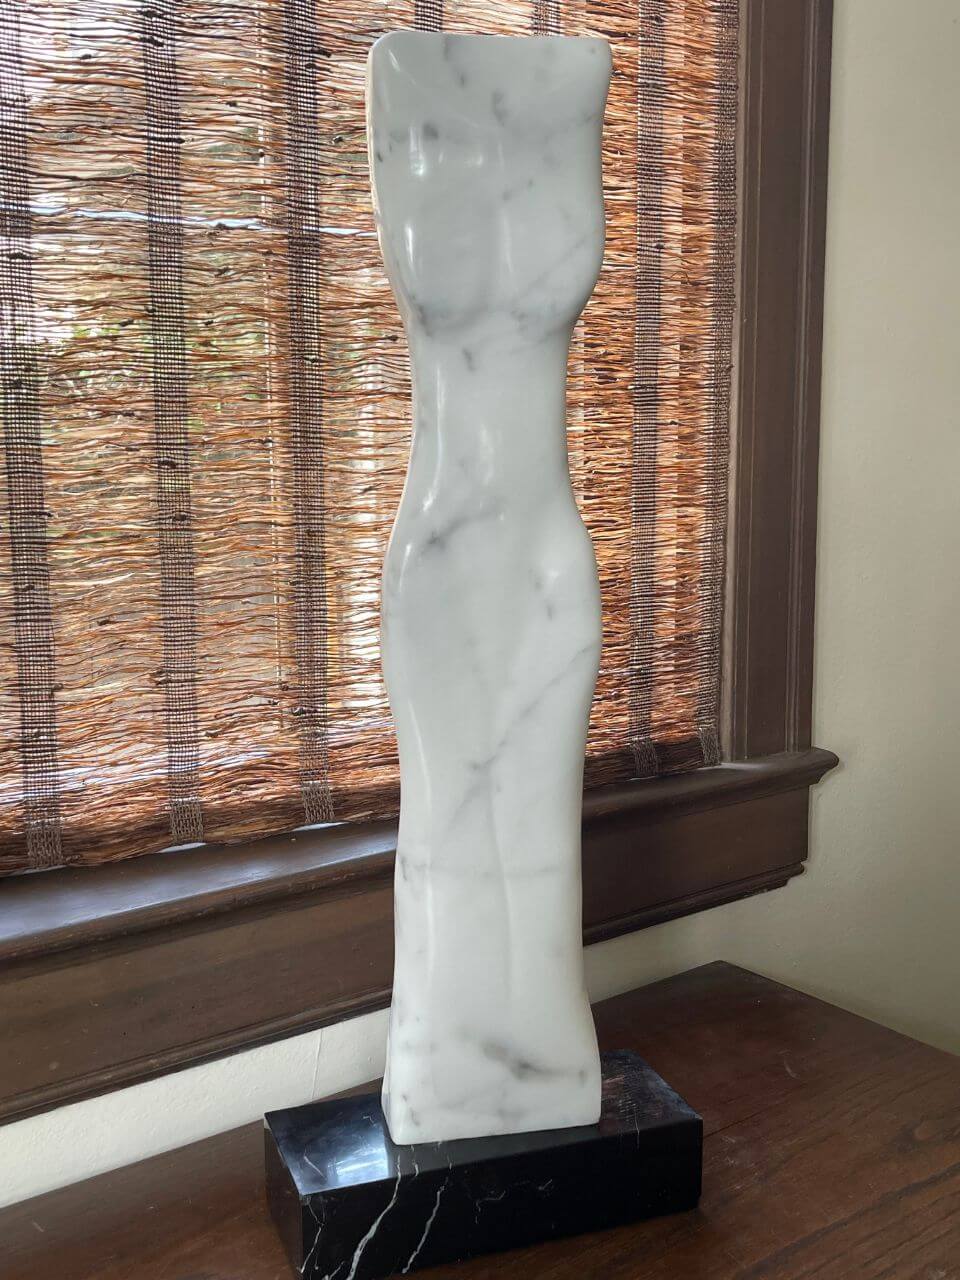 A tall marble nude